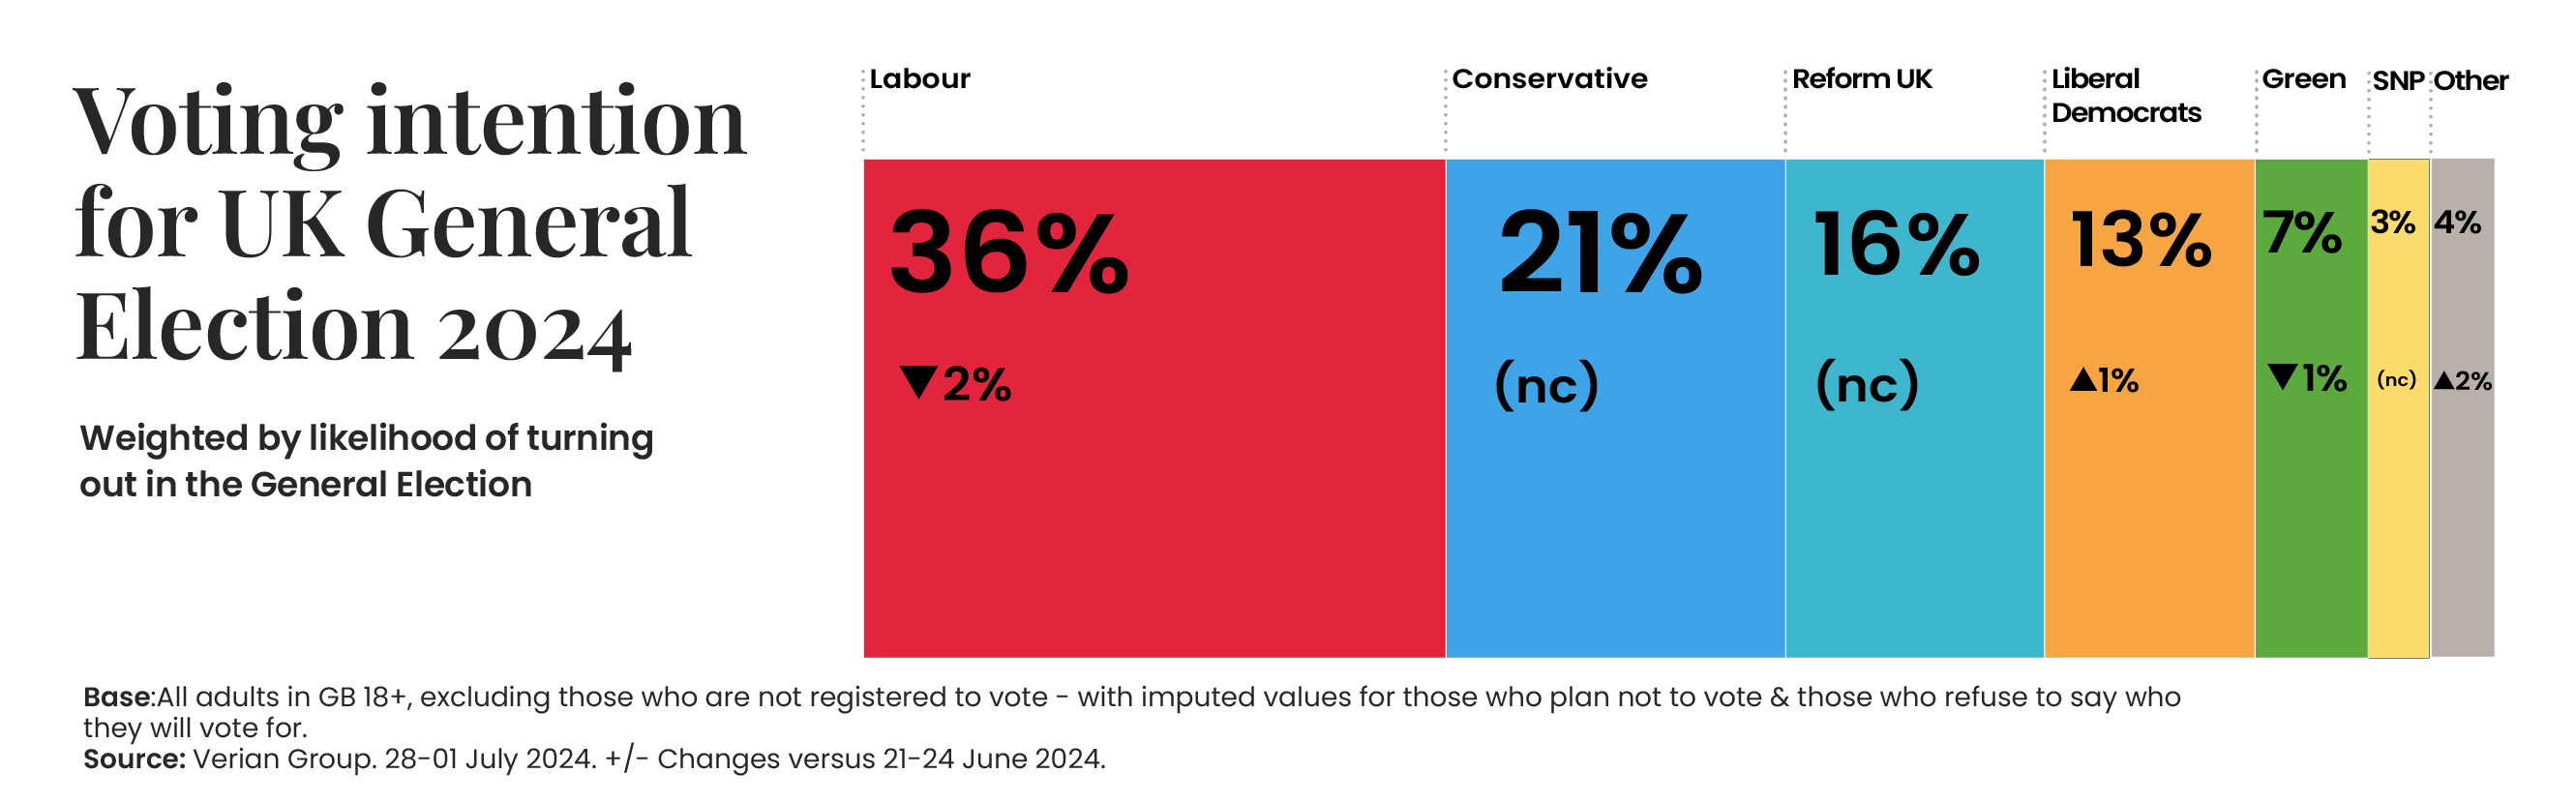 Voting Intention_2606 4-1